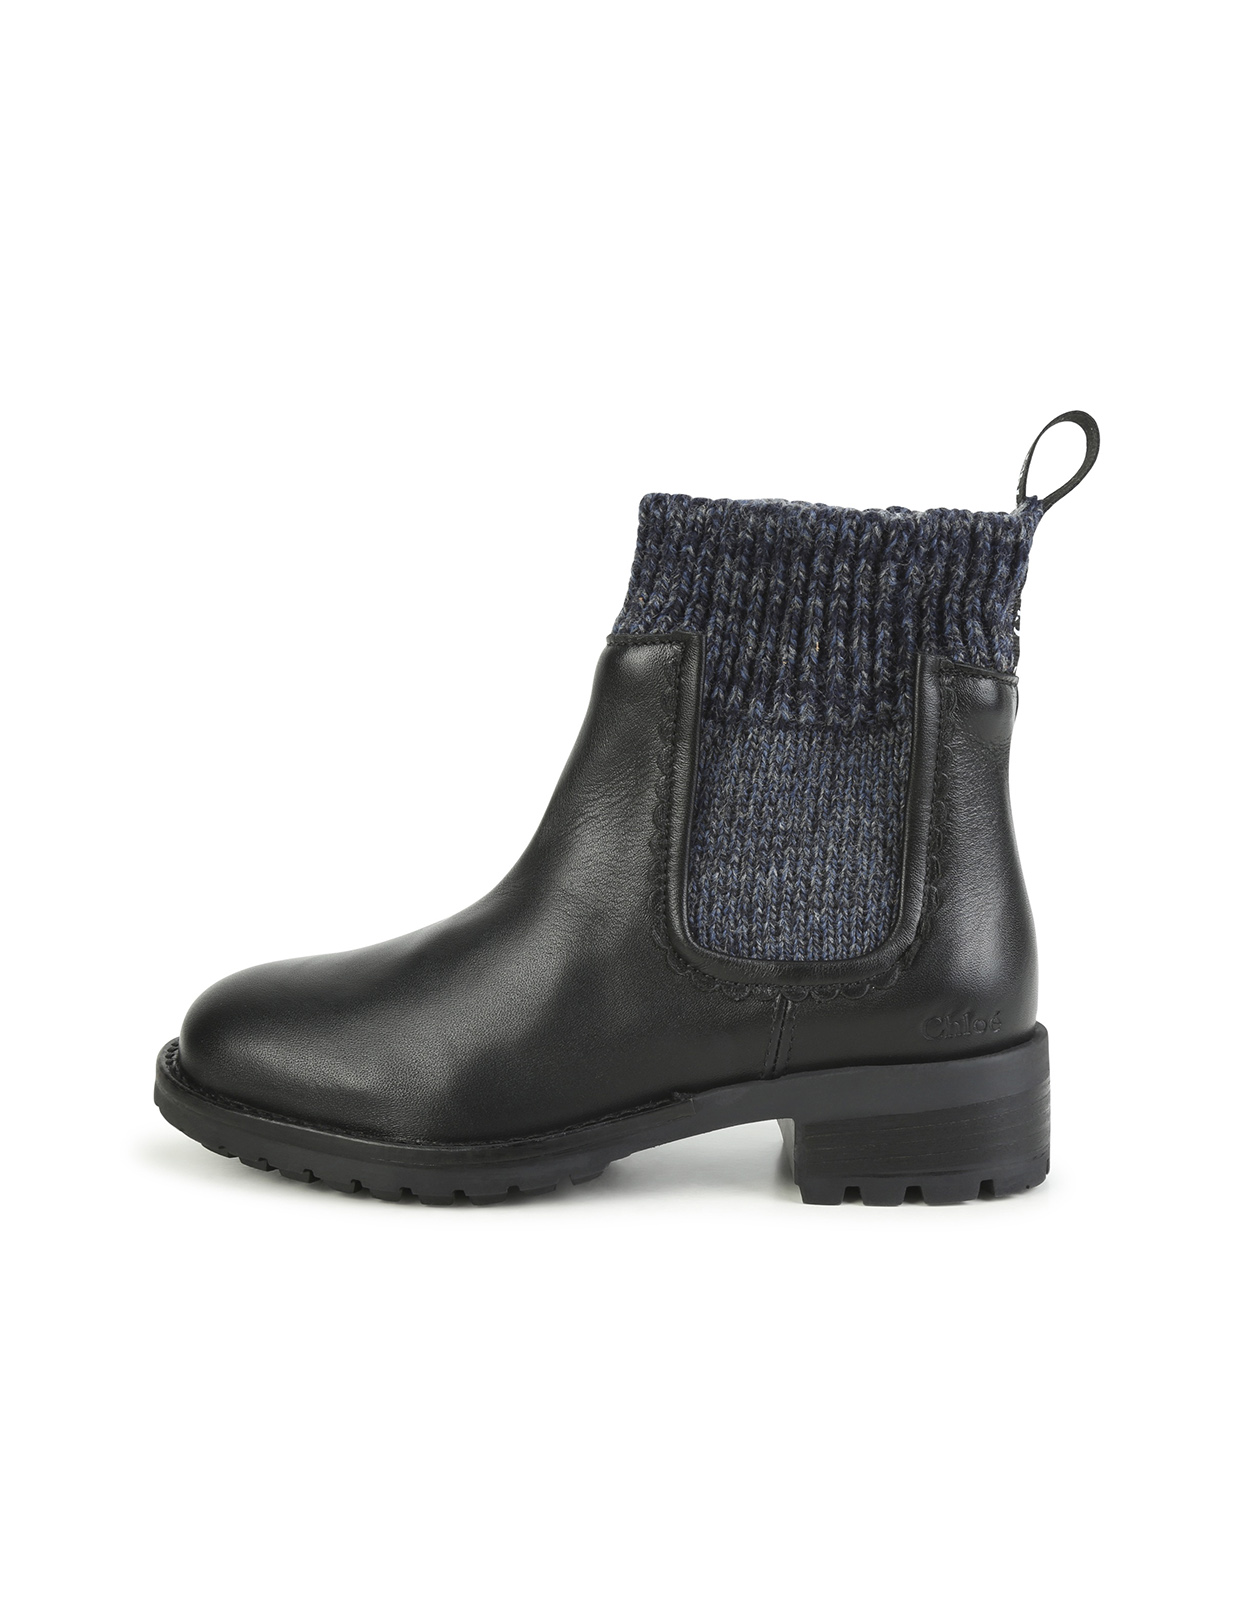 Black Leather Ankle Boots With Navy Blue Sock Insert - Chloé Kids ...